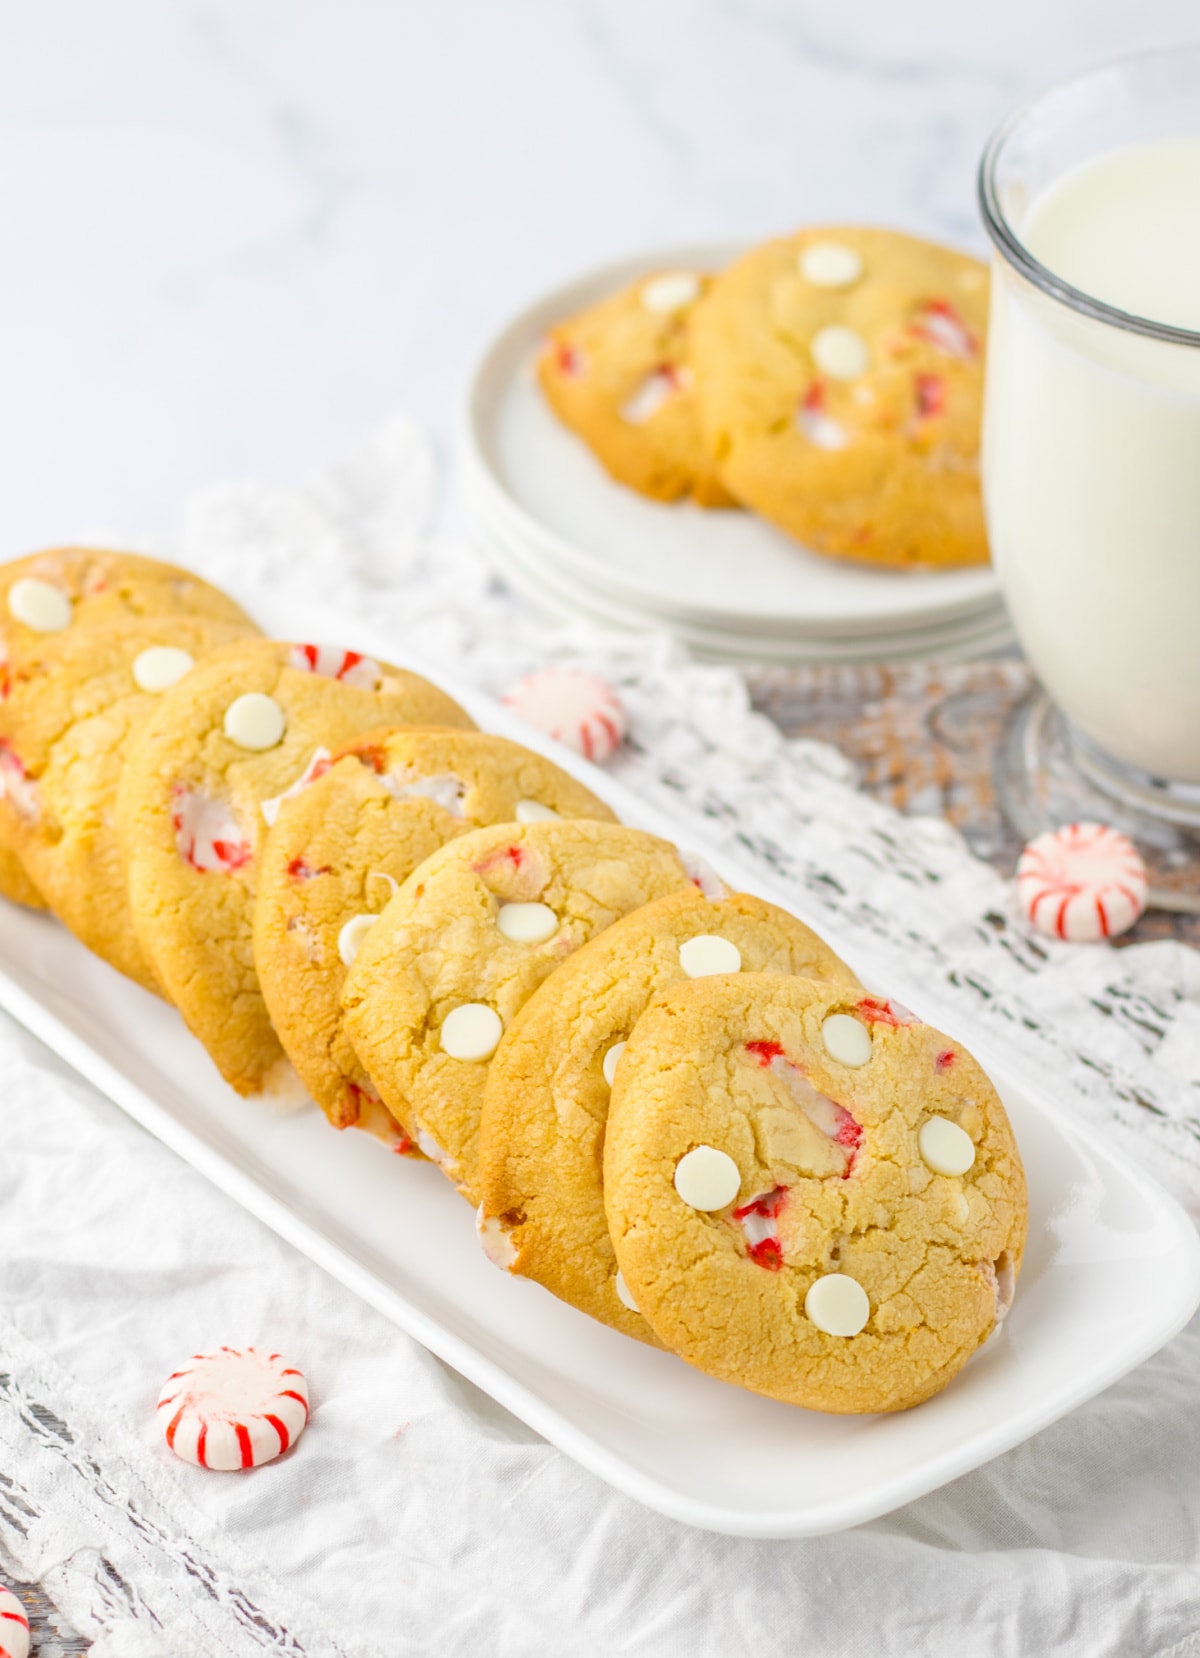 A plate of cookies with peppermint candies and a glass of milk.